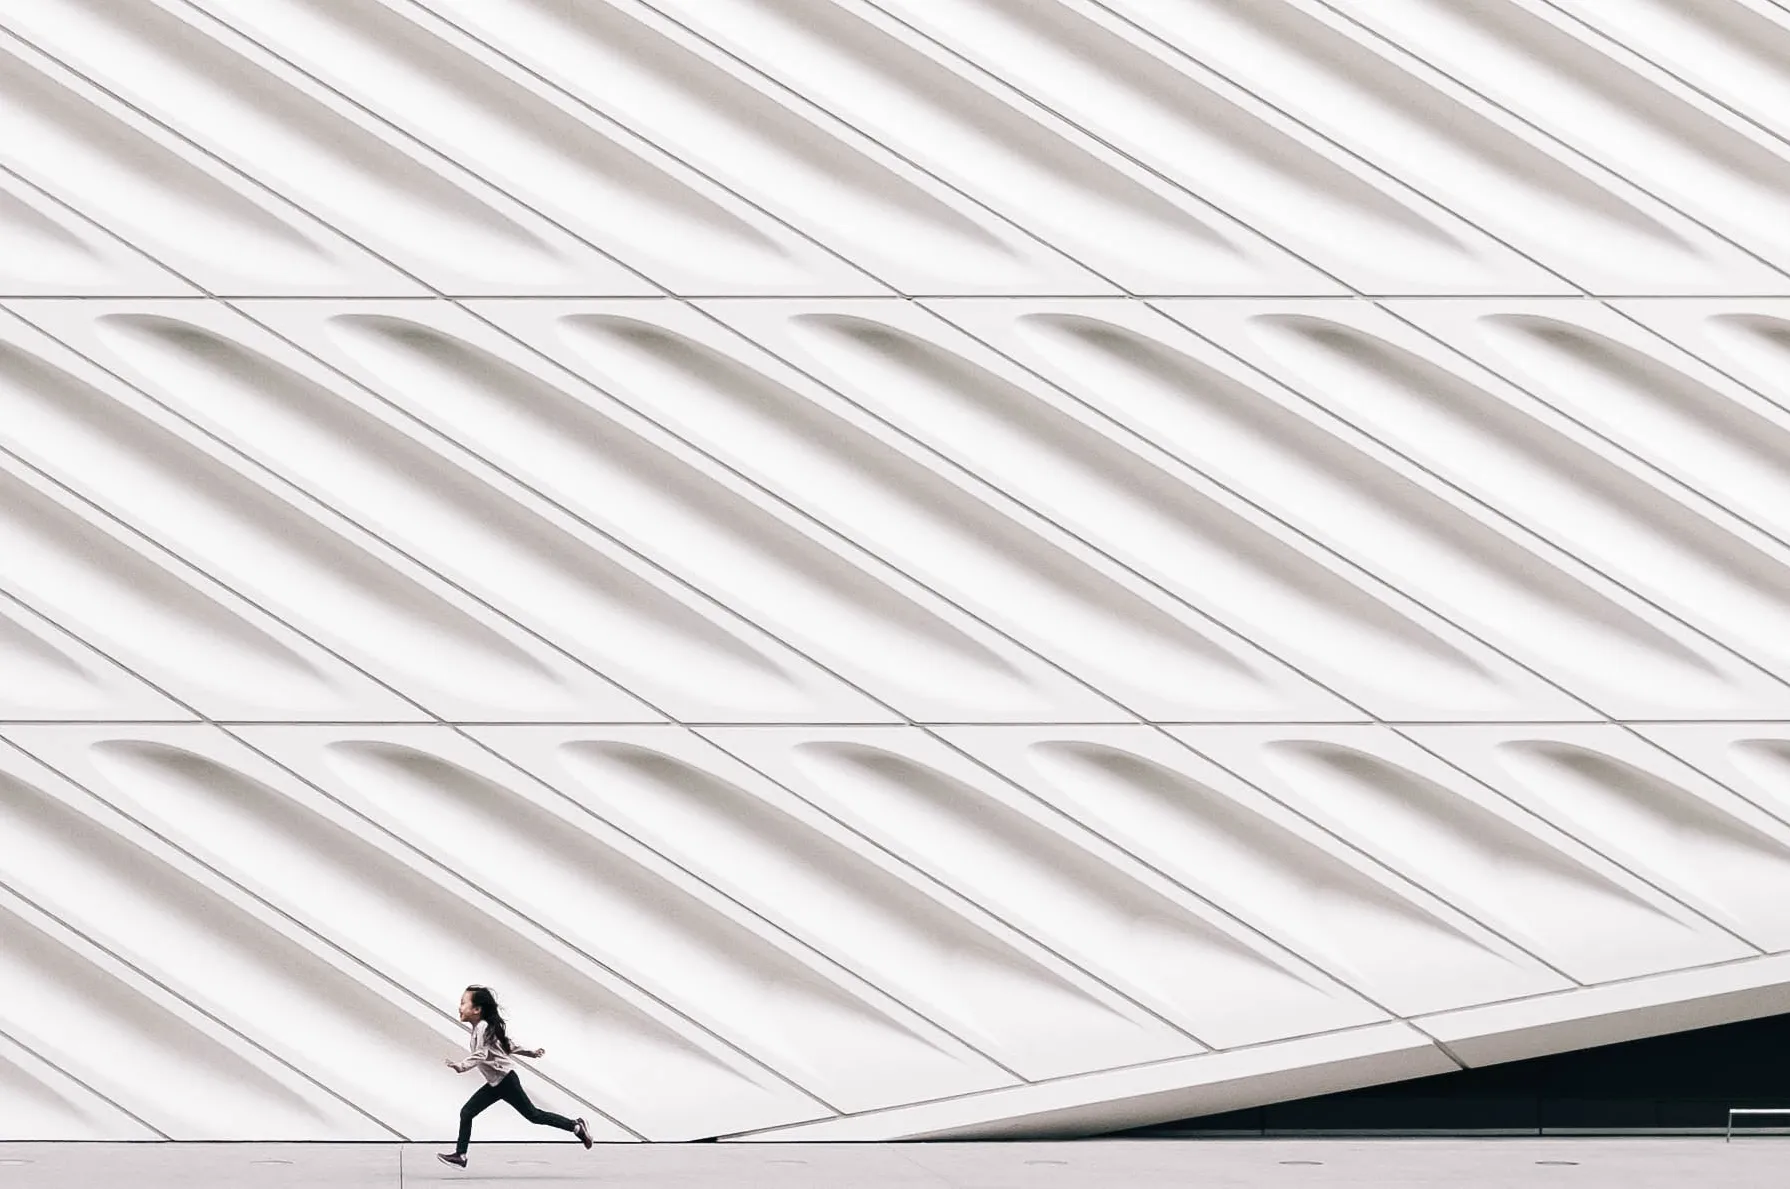 A girl, small in the frame, runs in front of a modern building